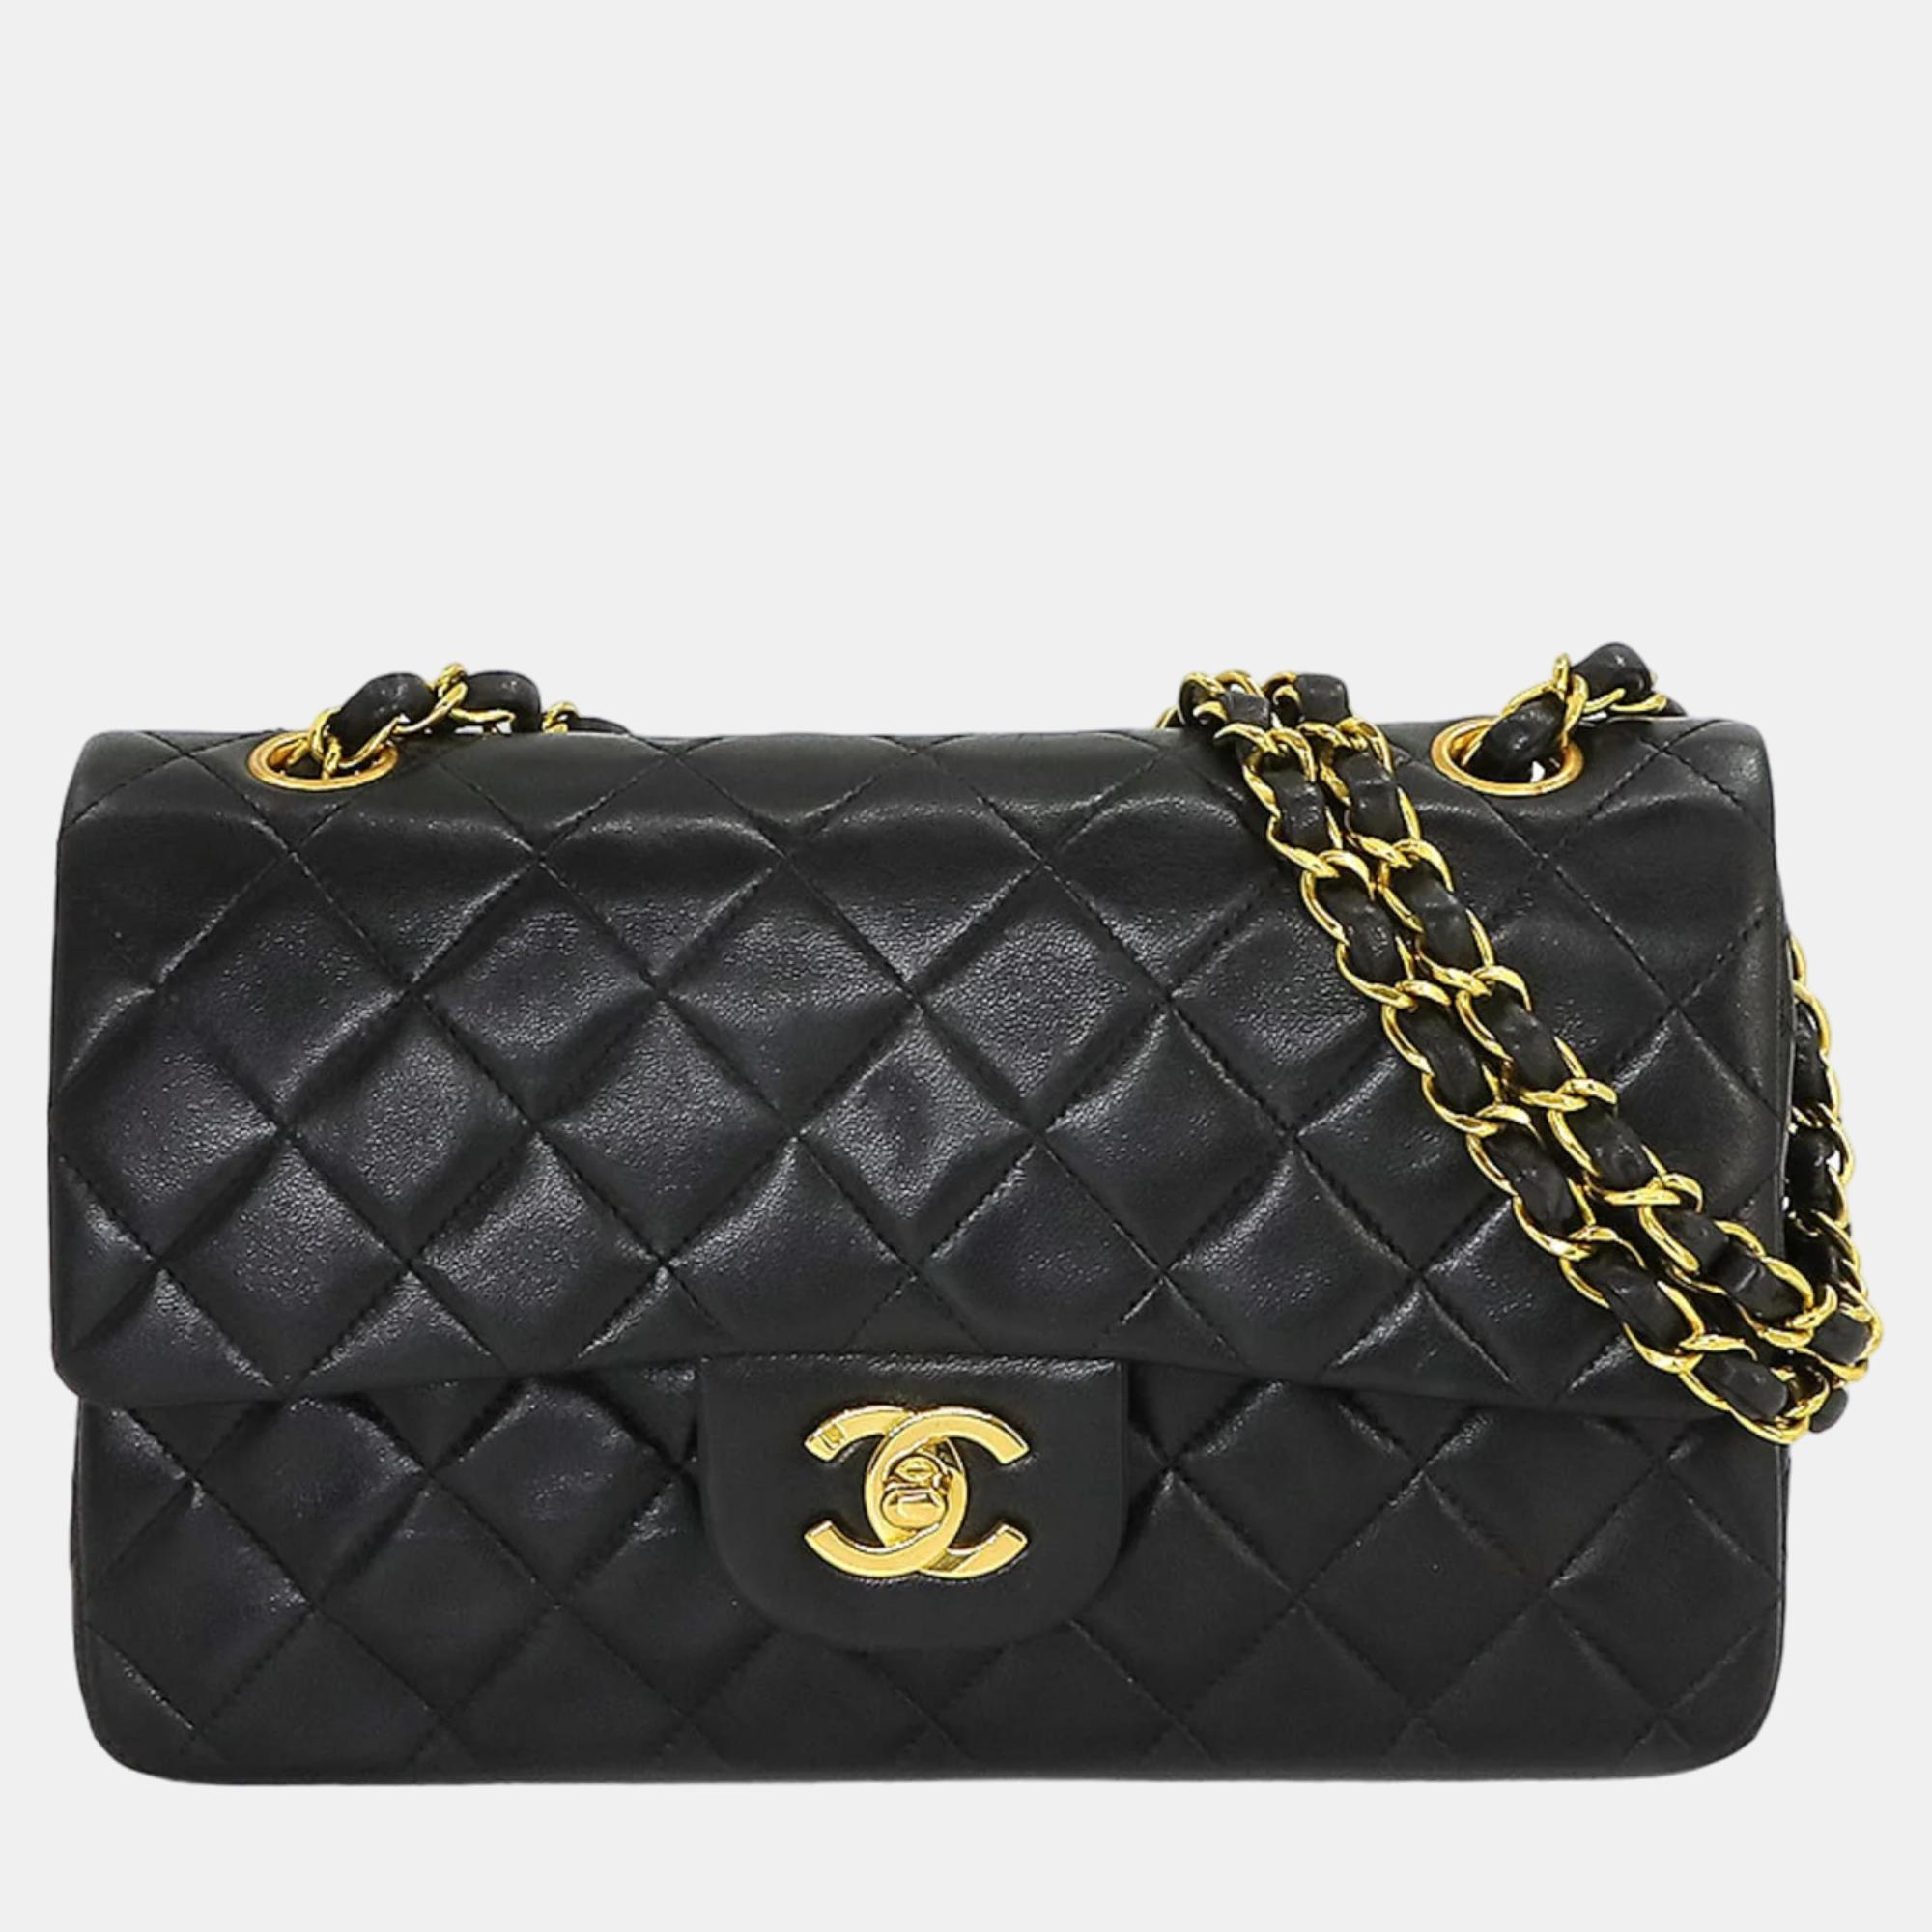 Chanel black lambskin leather small classic double flap shoulder bag